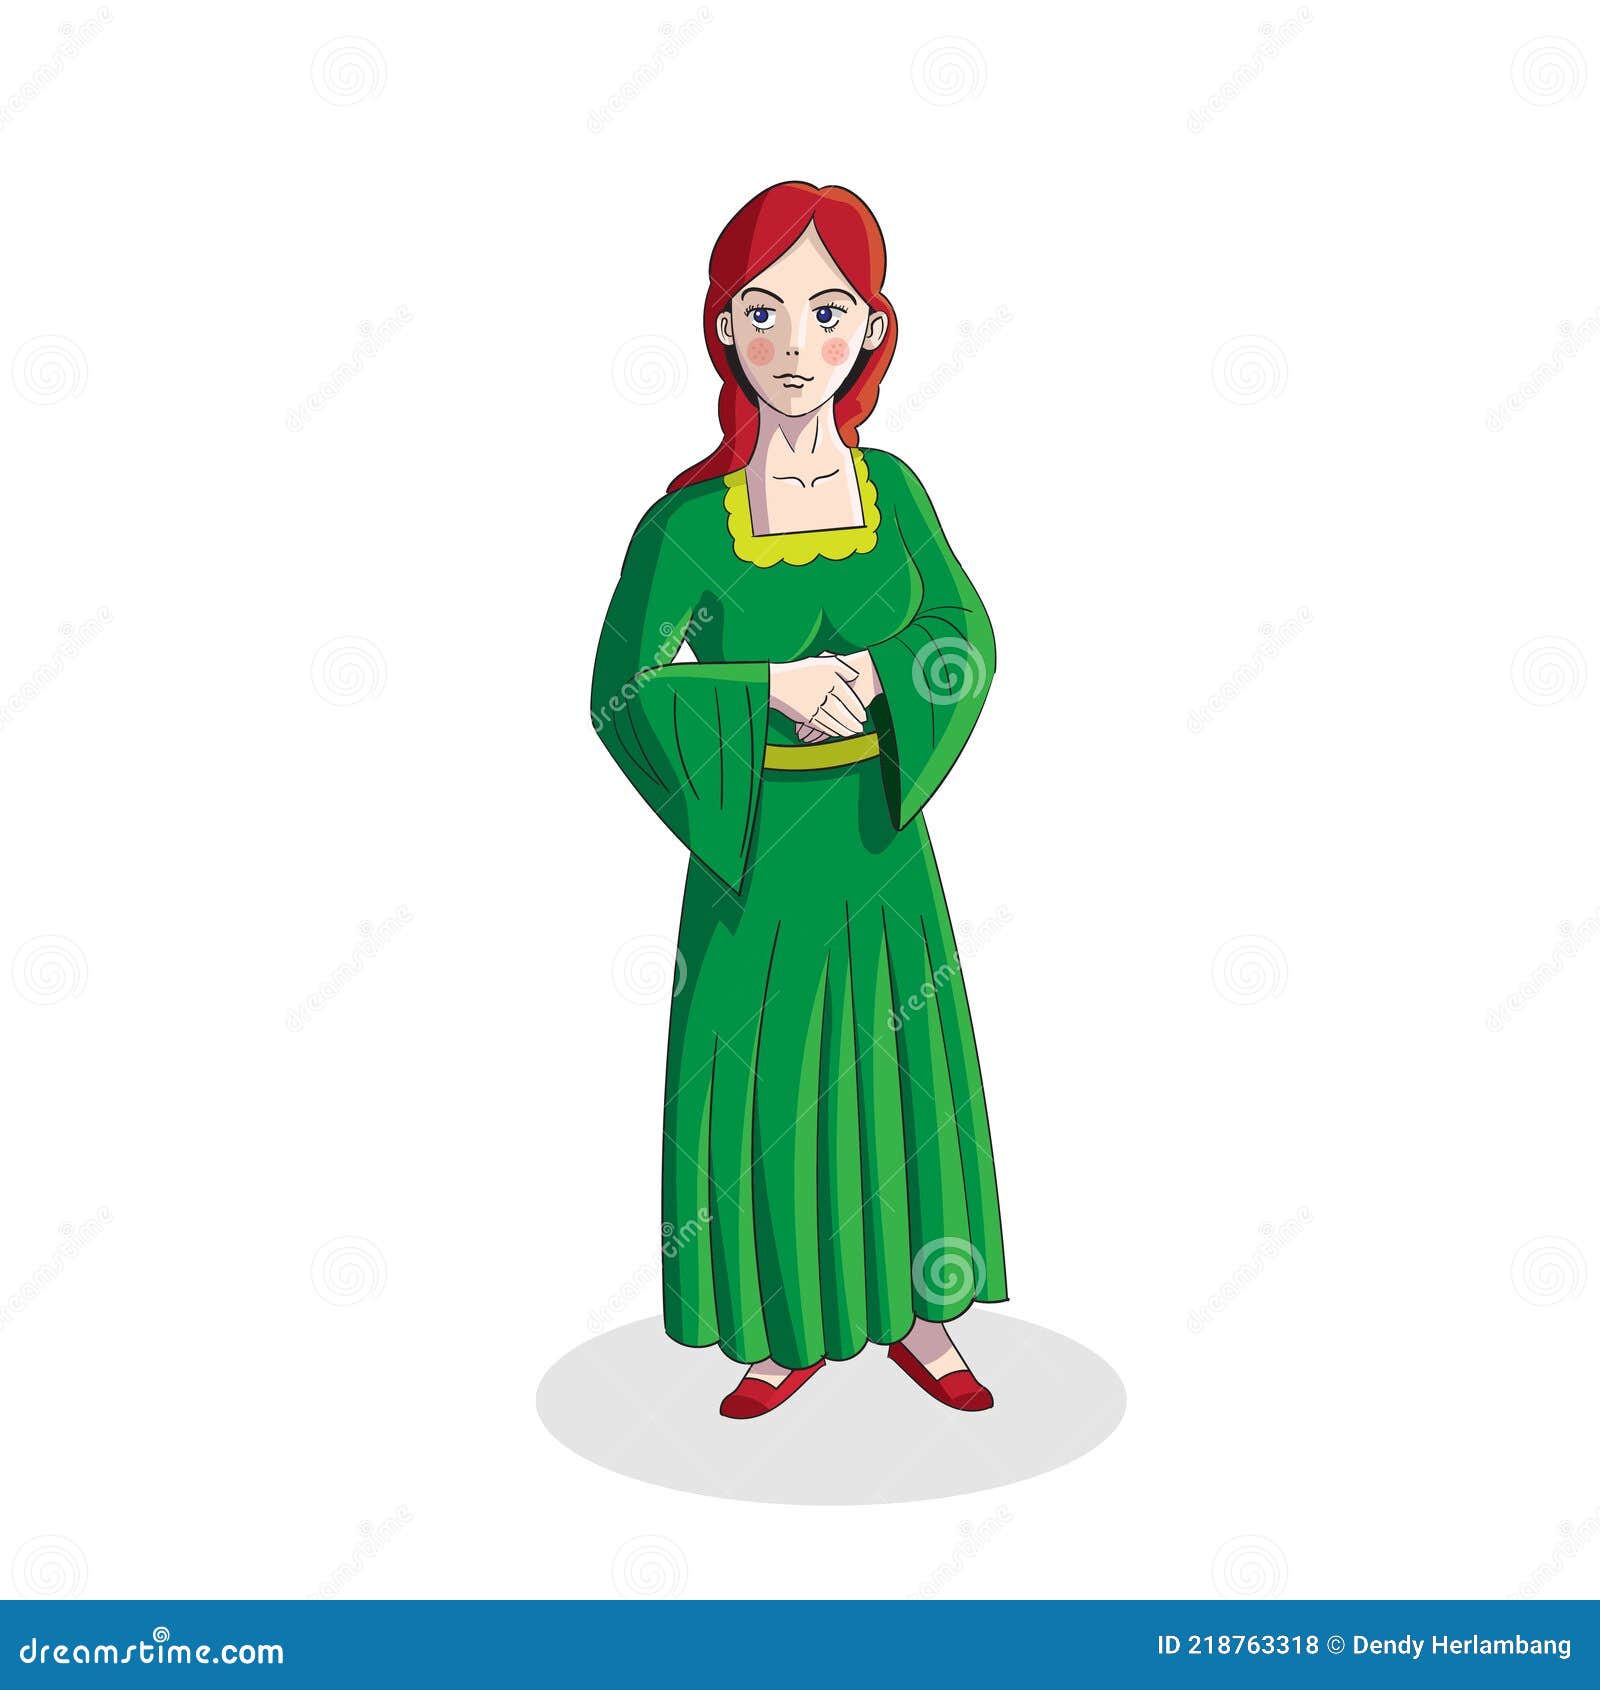 An Illustration of Irish Girl Character with Red Hair Wearing Traditional  Green Clothes Stock Vector - Illustration of cartoon, banner: 218763318